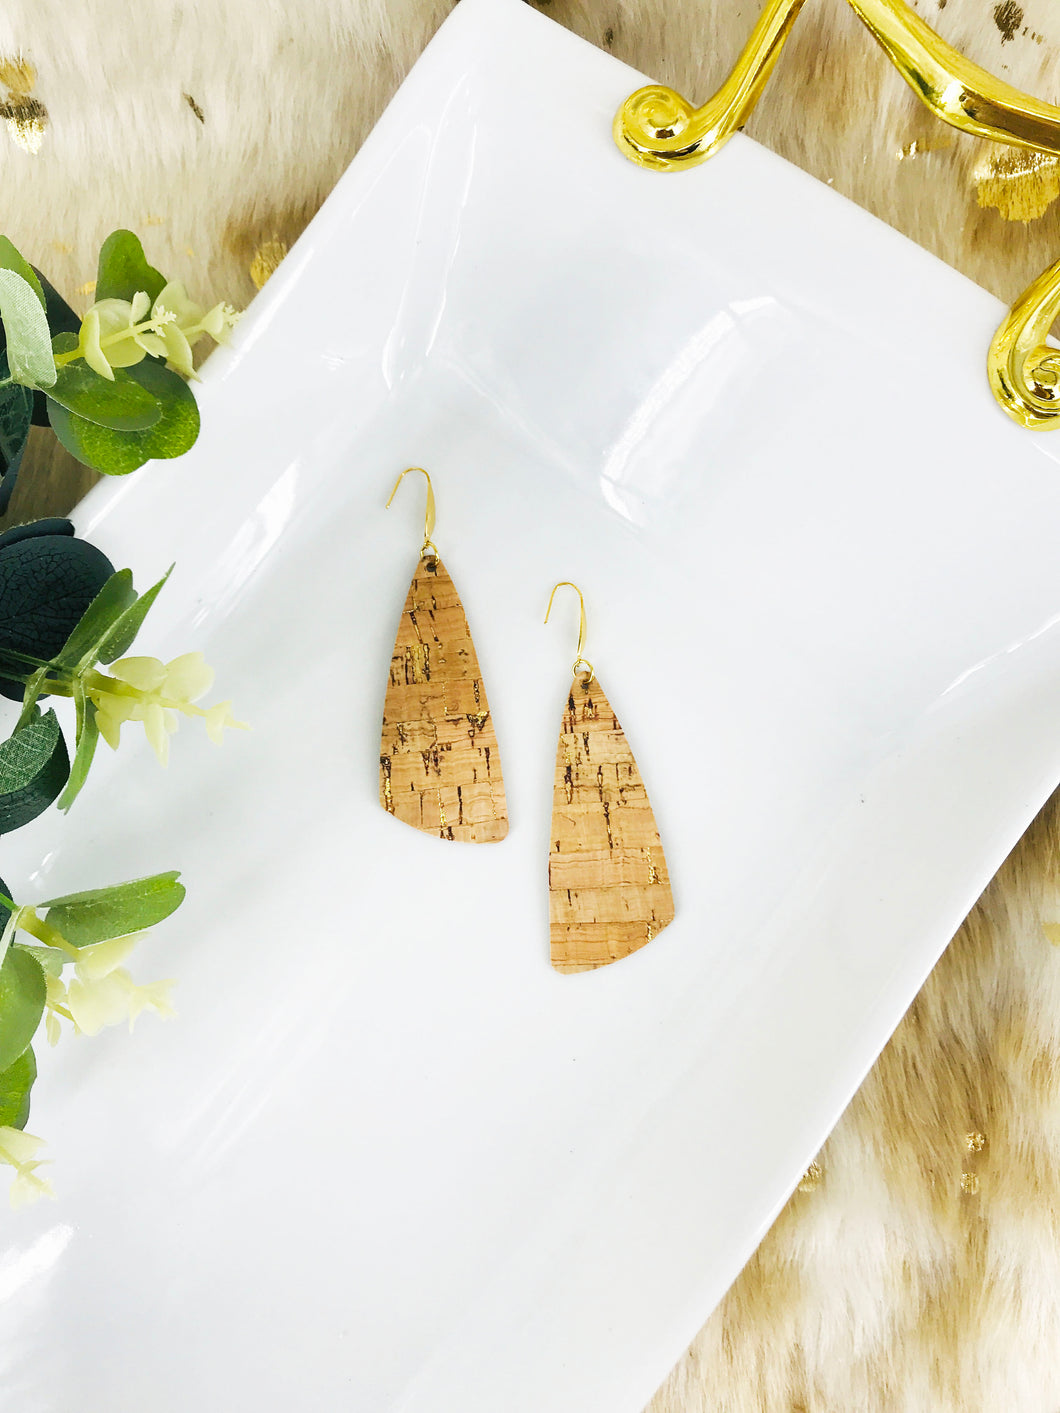 Gold Metallic Accent Cork on Leather Earrings - E19-2327